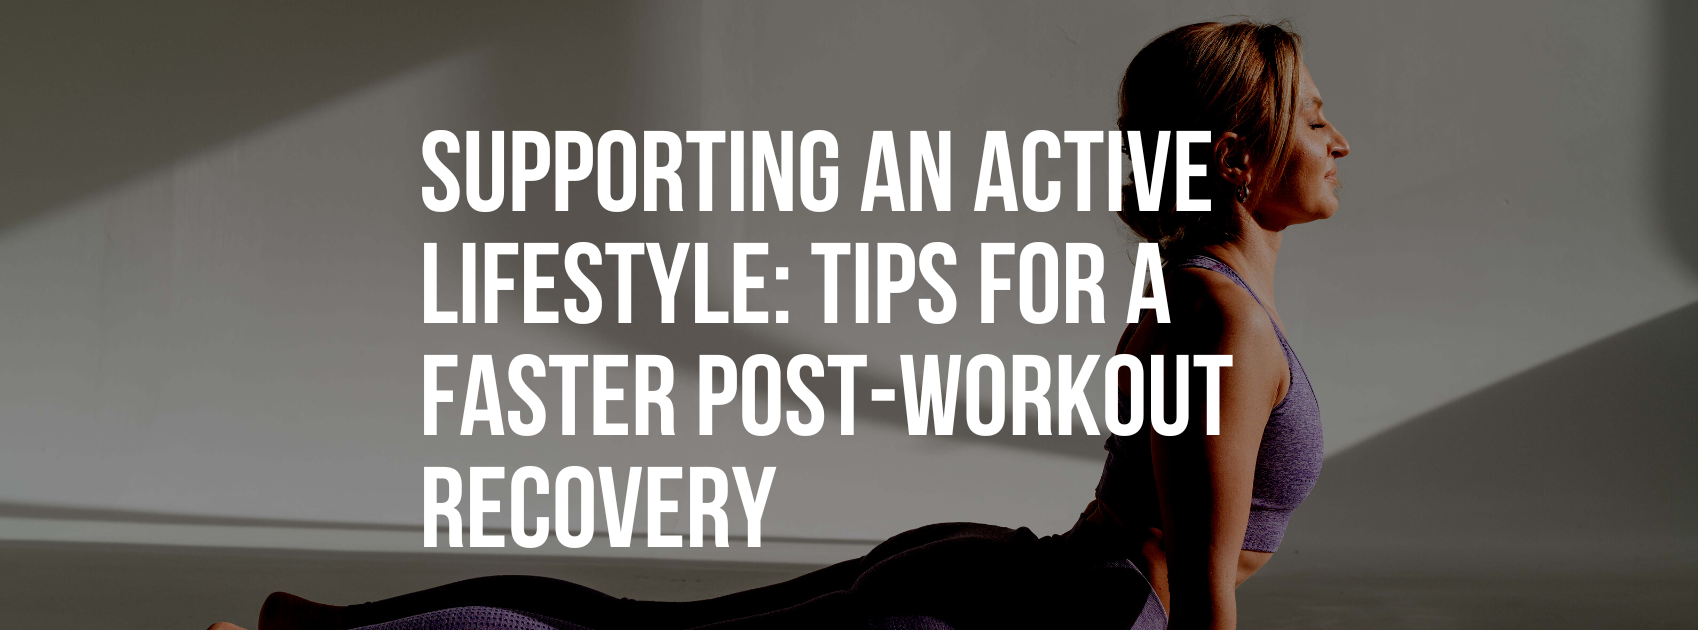 Supporting an Active Lifestyle: Tips for a Faster Post-Workout Recovery